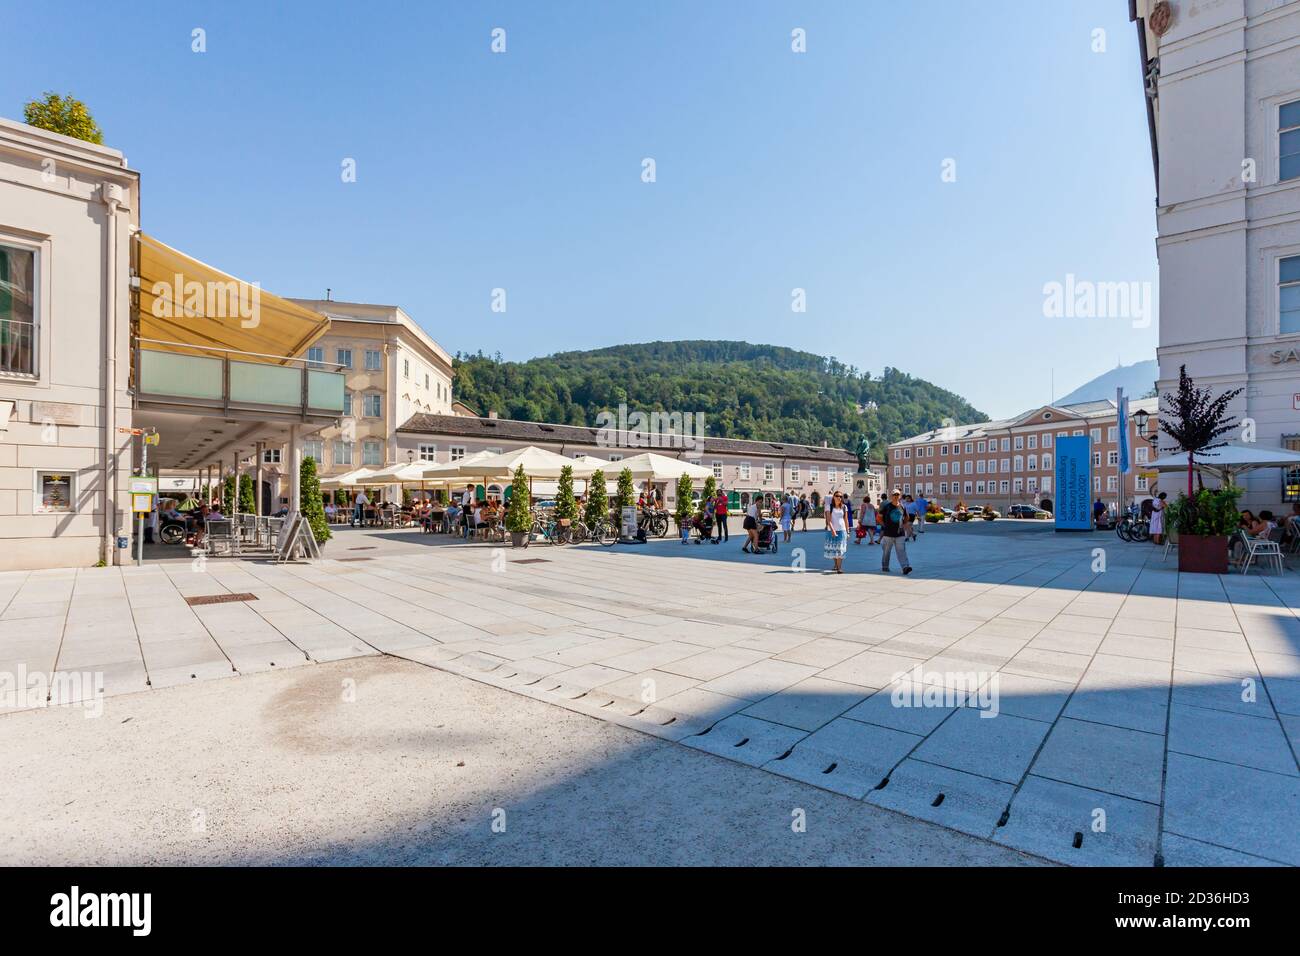 Mozartplatz, a historic landmark in central Salzburg. It is a square best known for its memorial statue of composer Wolfgang Amadeus Mozart. Stock Photo